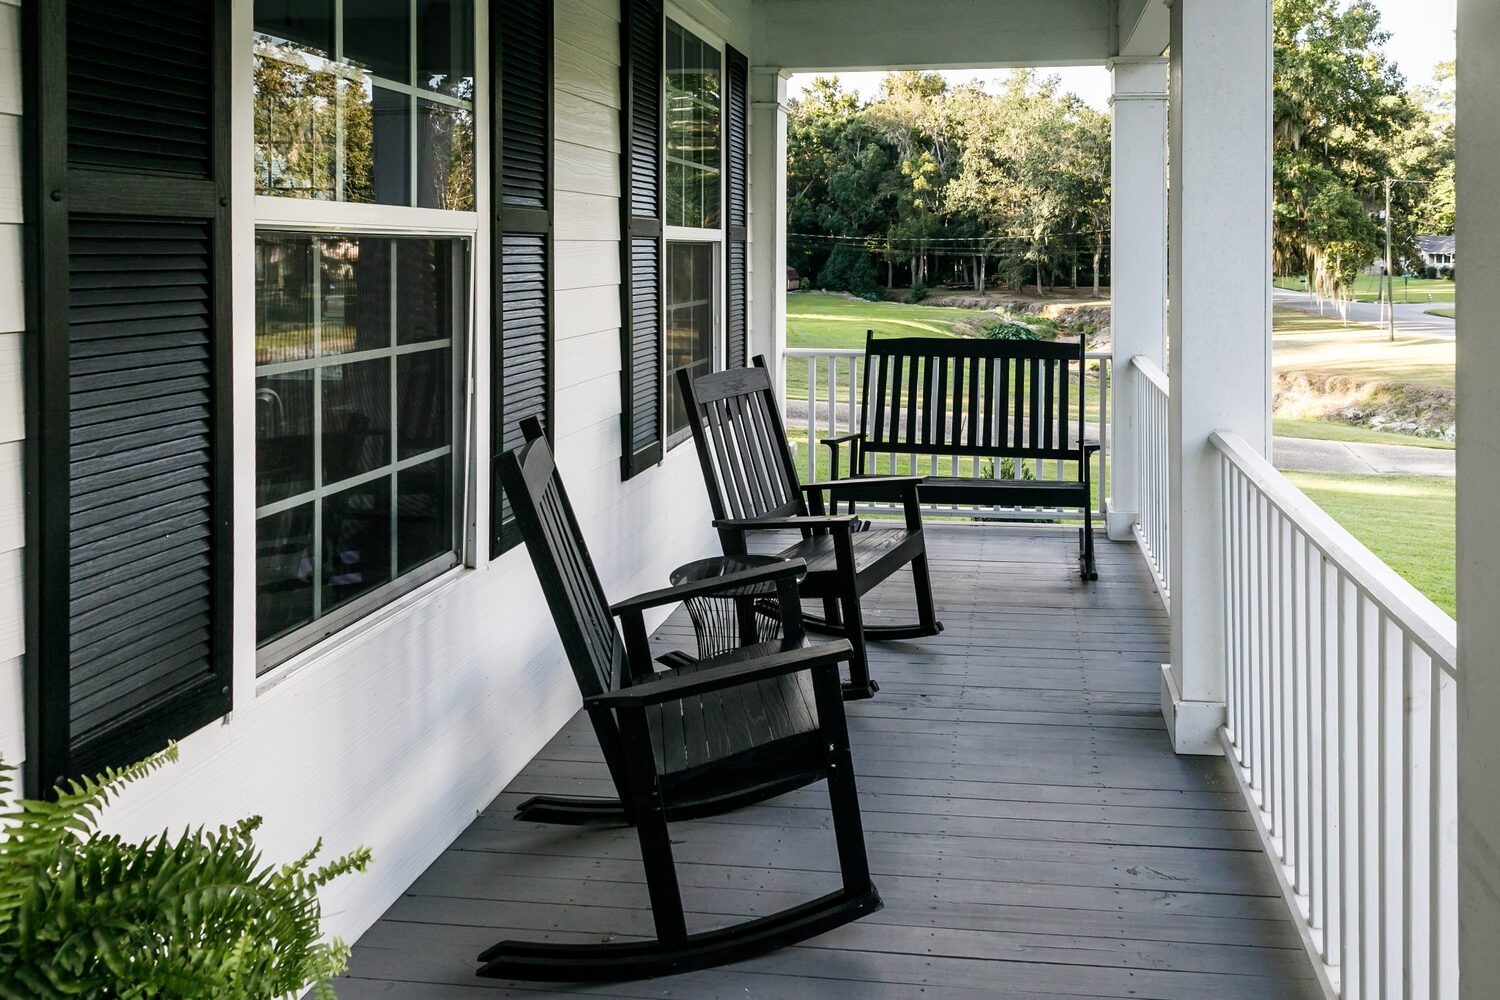 Skill and expertise shine in the white wooden porch made by porch builders Golf based